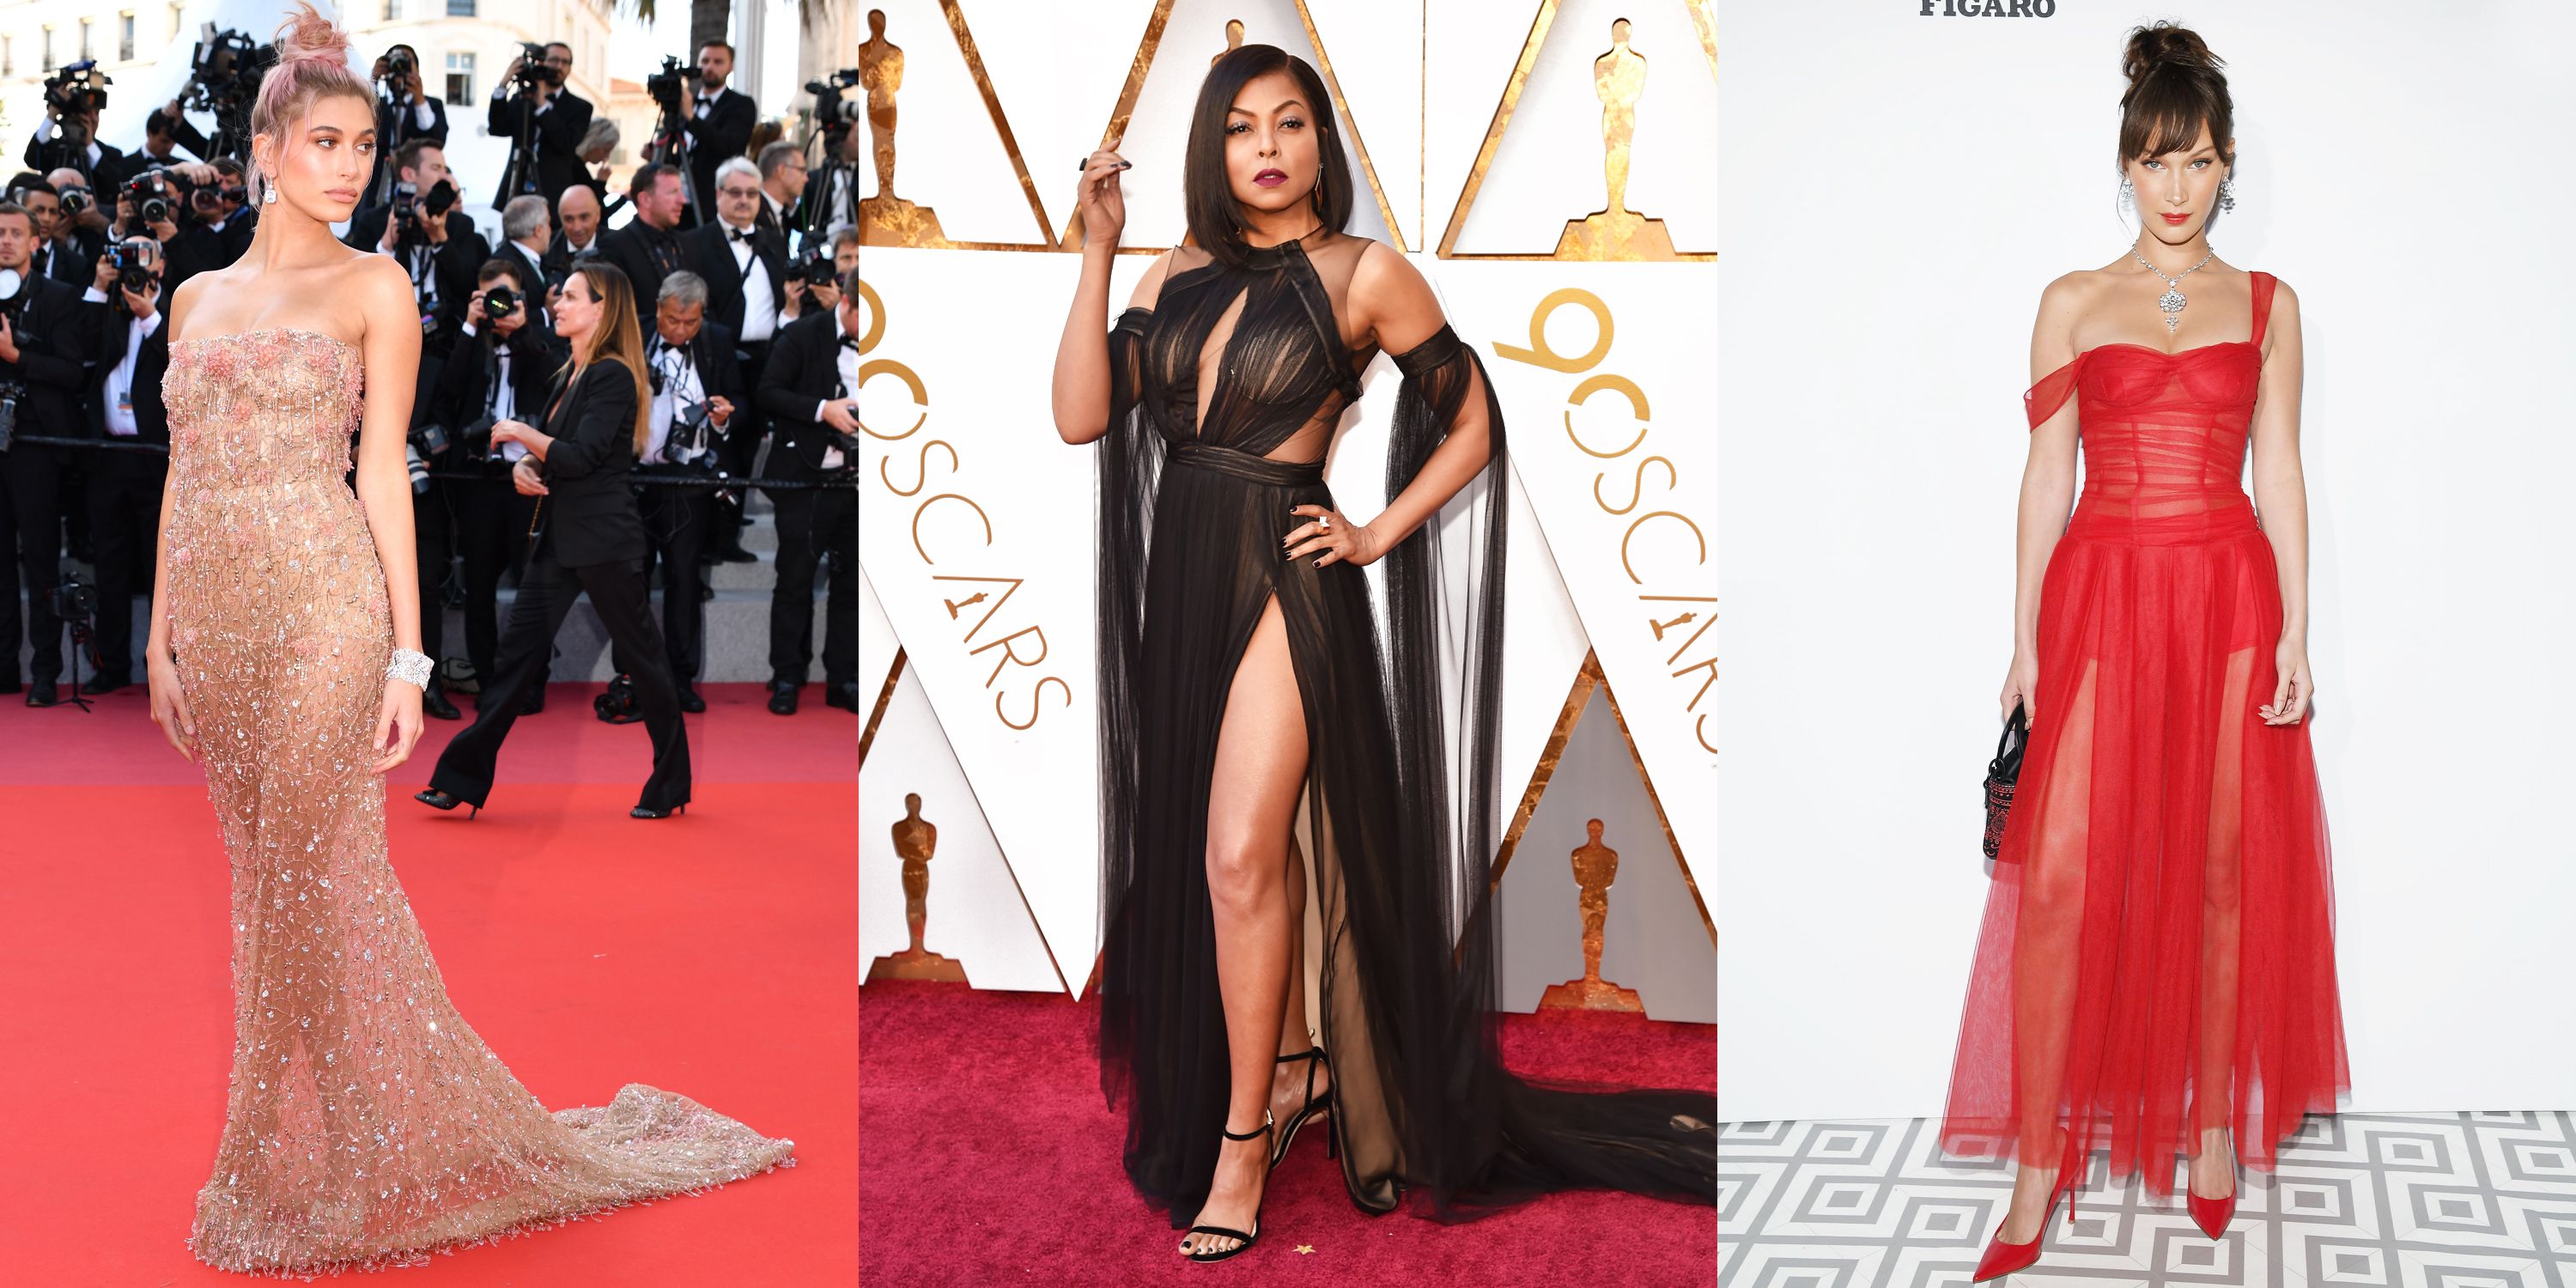 Most Revealing Oscar Dresses The Most Daring Naked Dresses Celebrities Have Worn